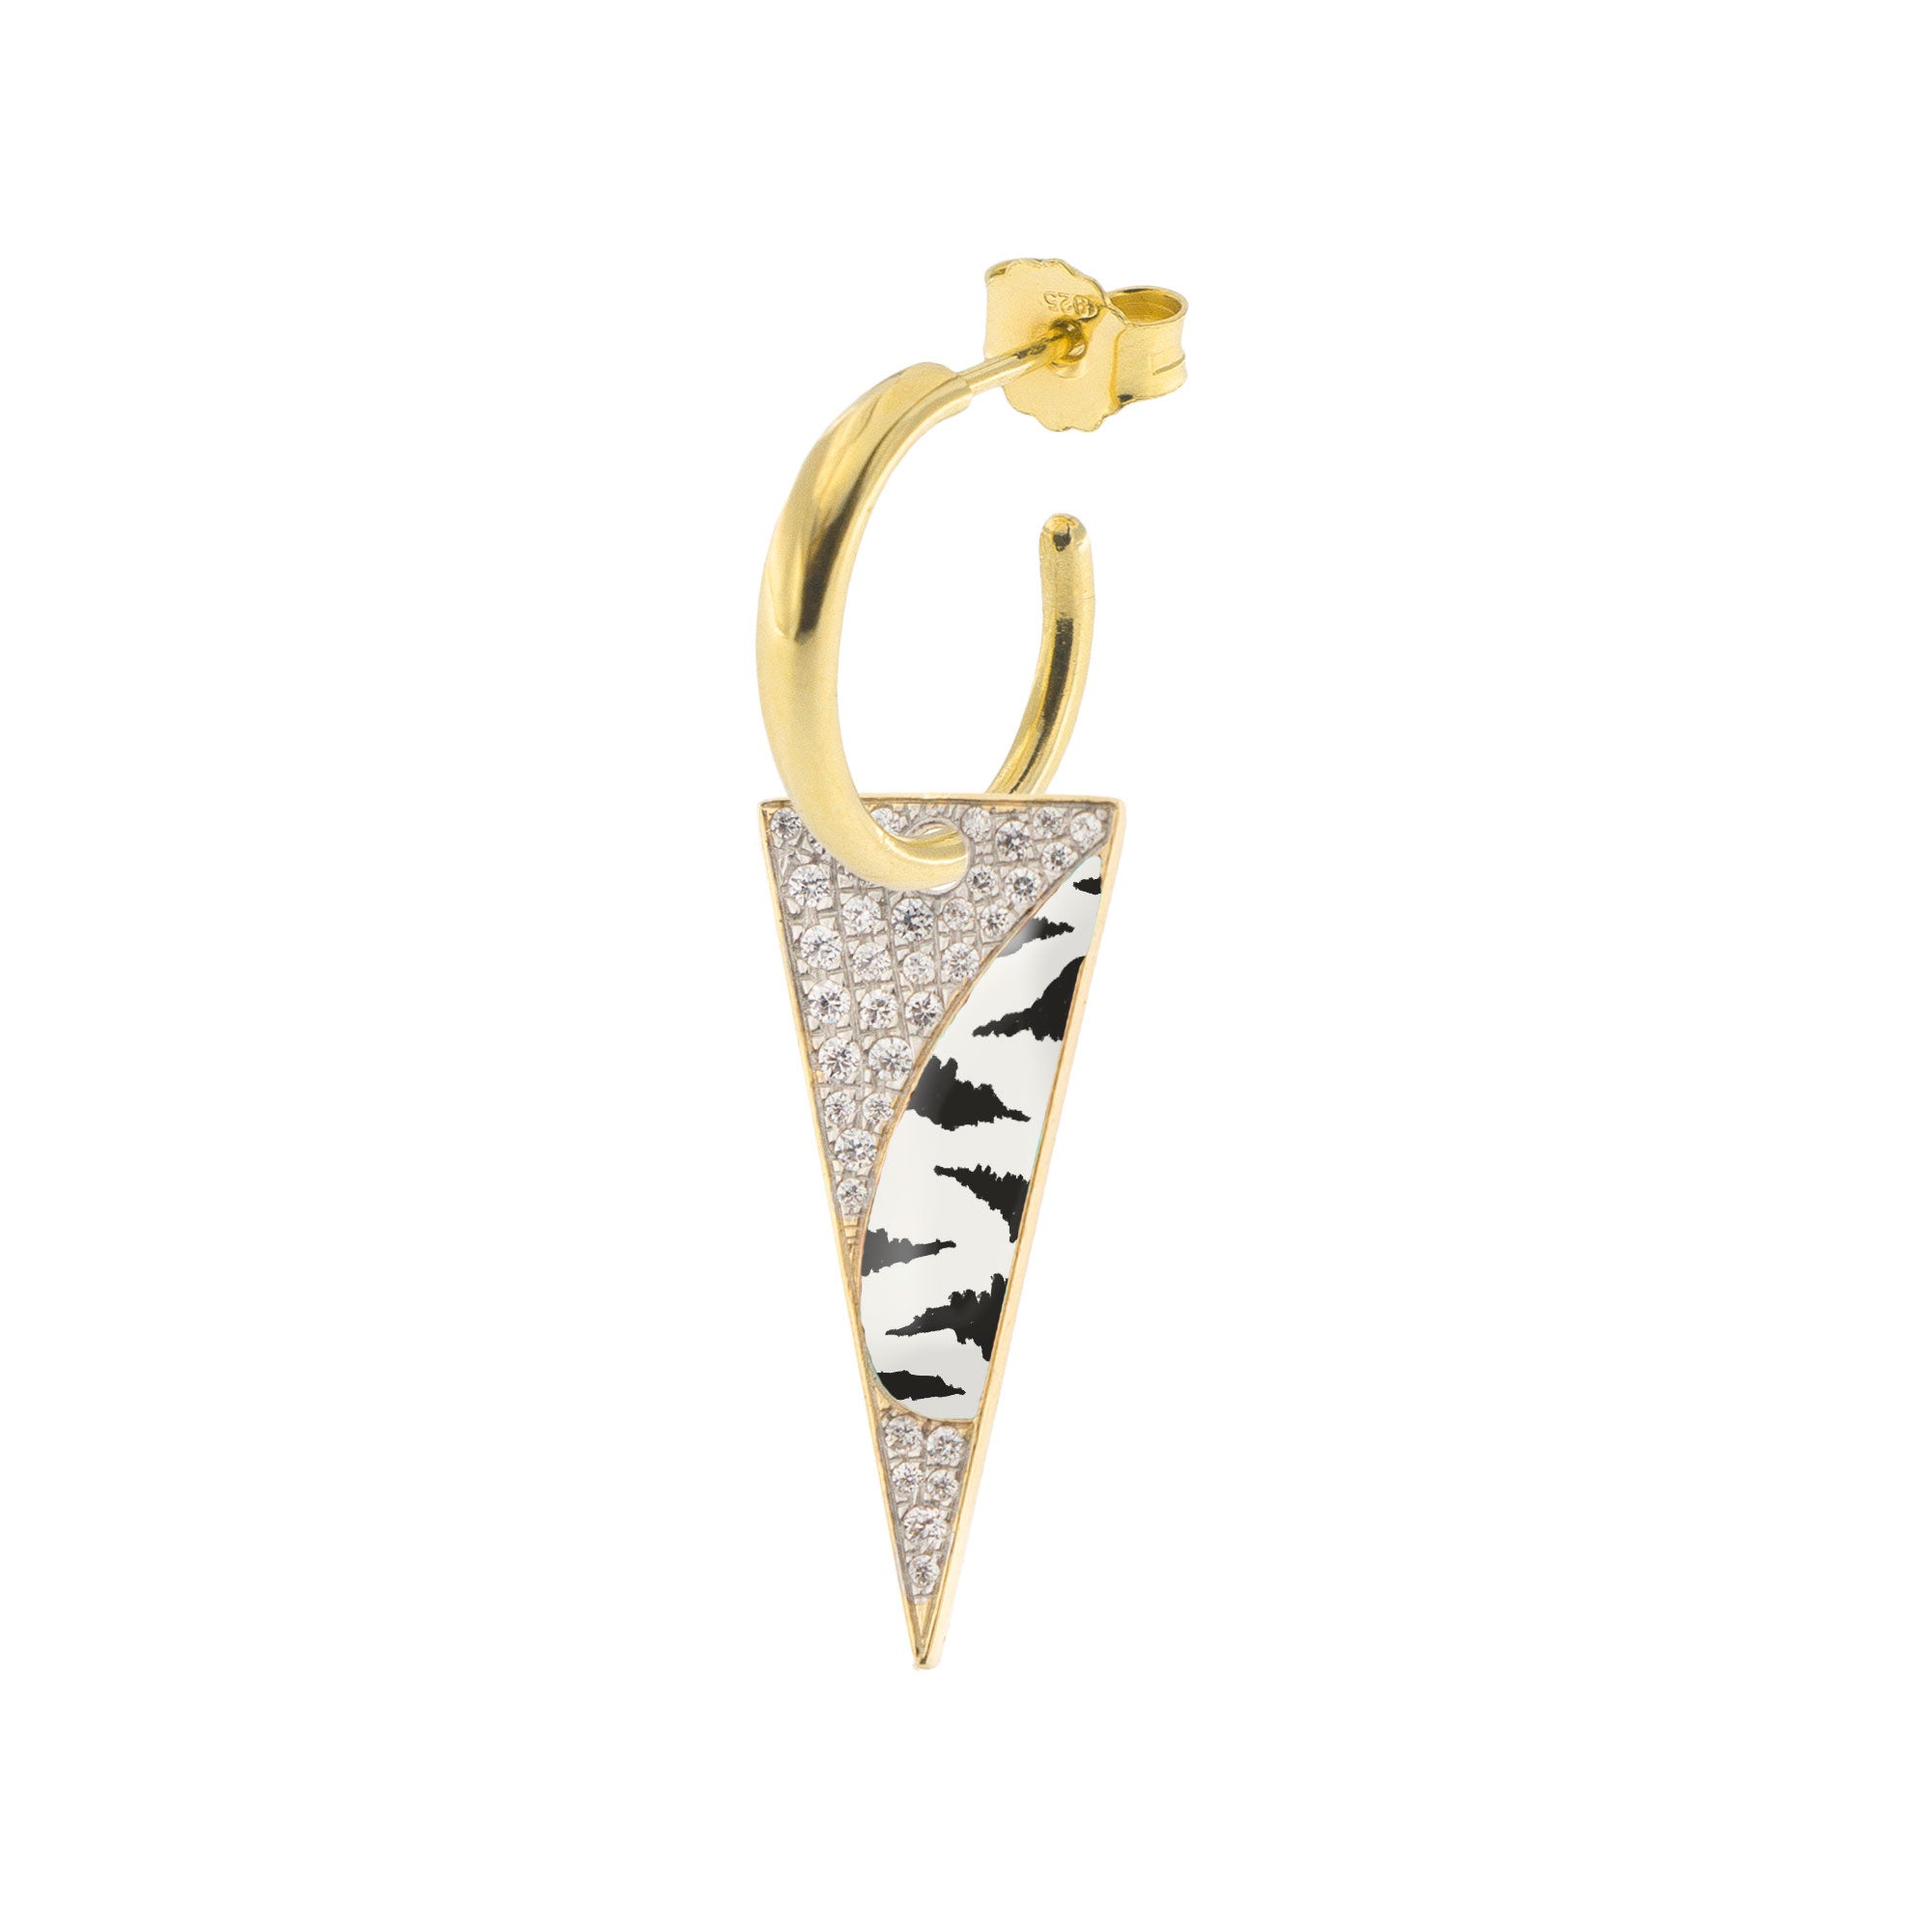 Earrings - Single Earring with Small Hoop and Spike - Zebra Print - 1 | Rue des Mille